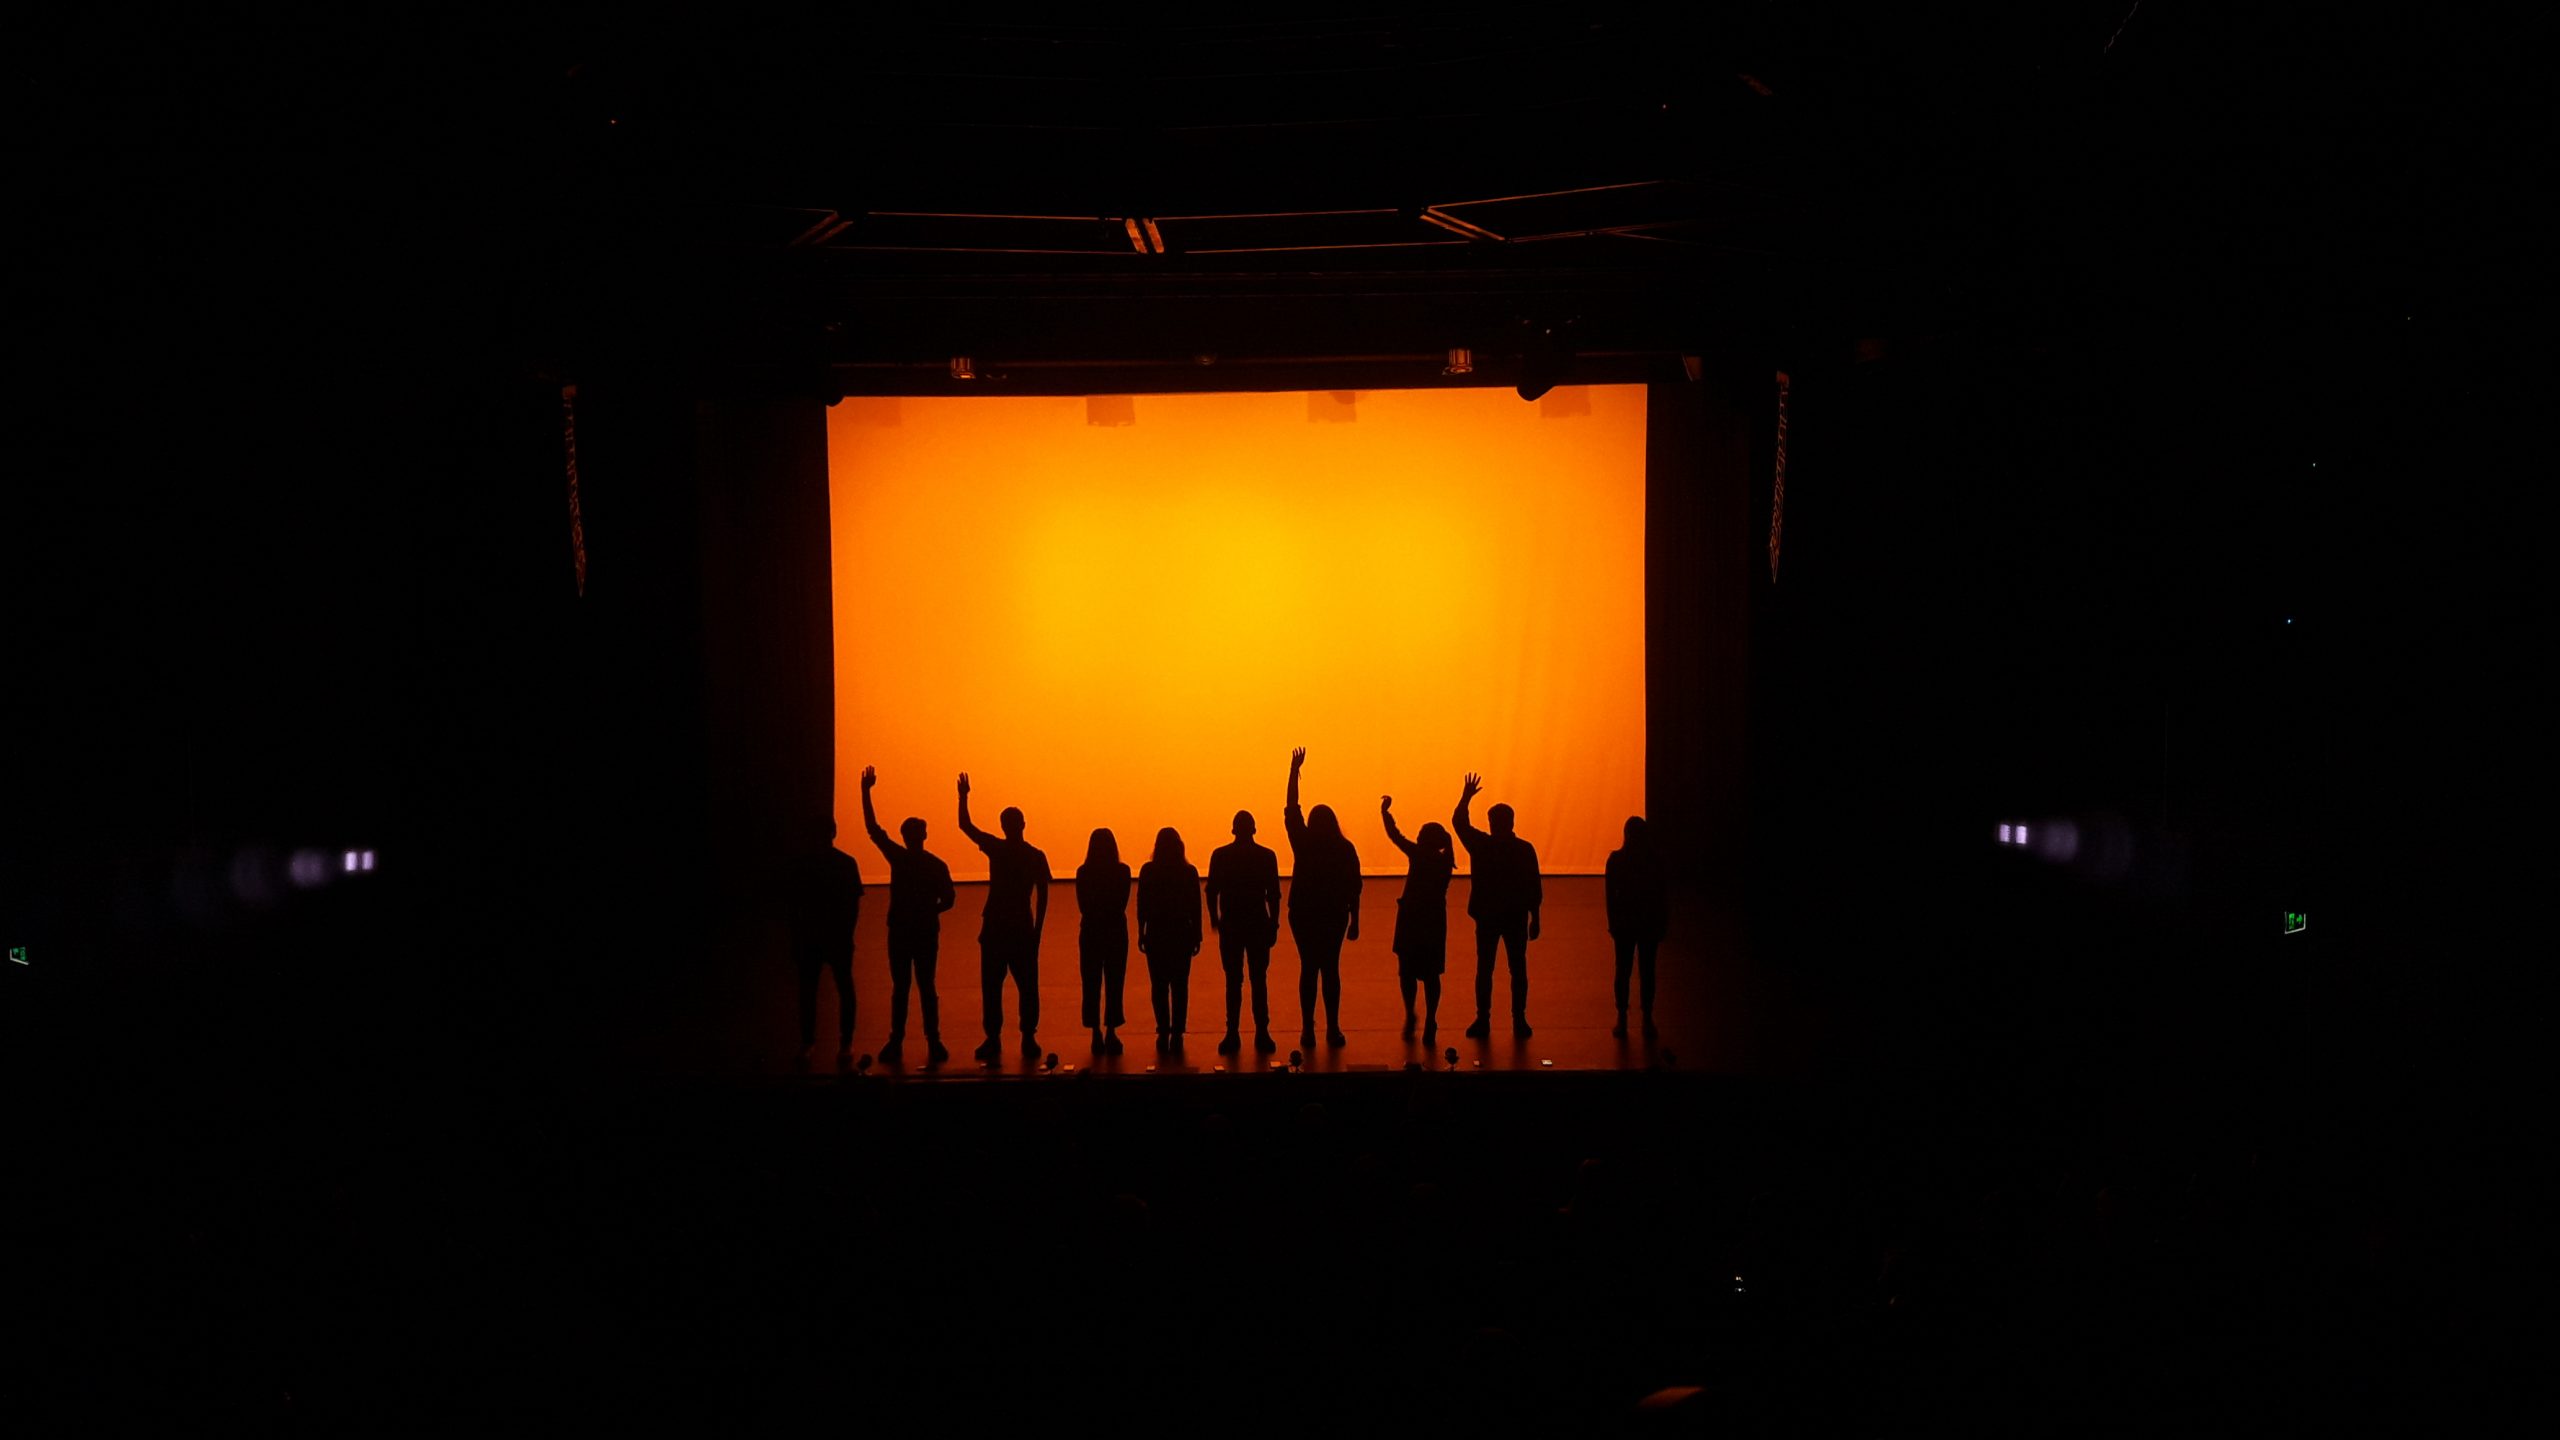 A group of people standing on top of a stage with an orange lit backdrop.